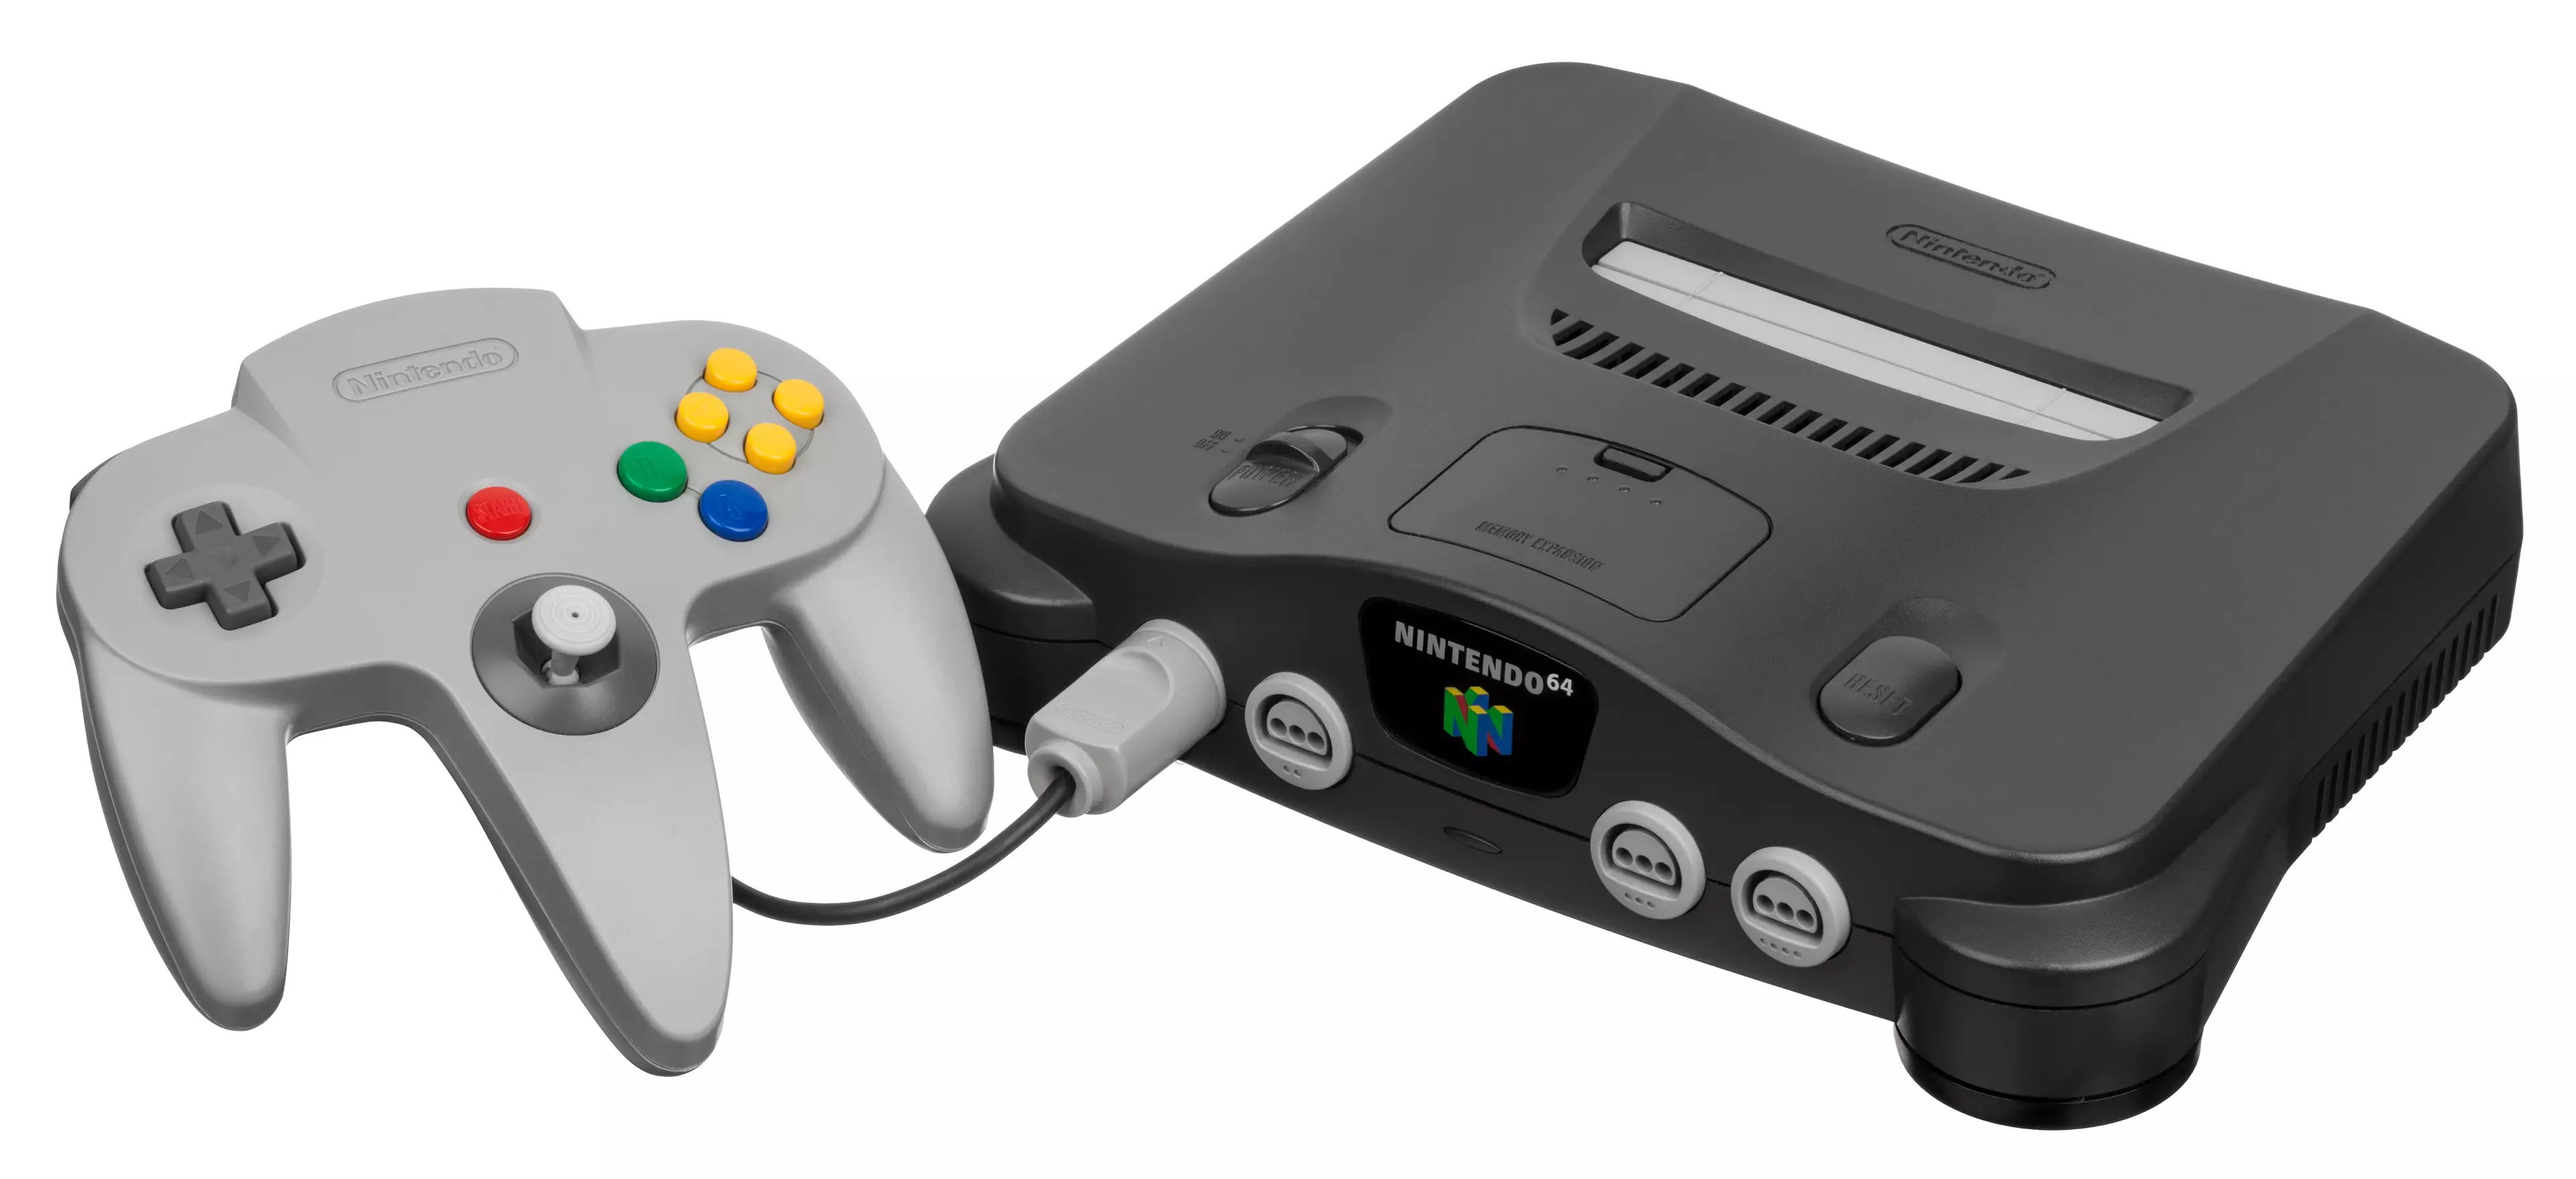 The Nintendo 64 and its NUS-005 controller /